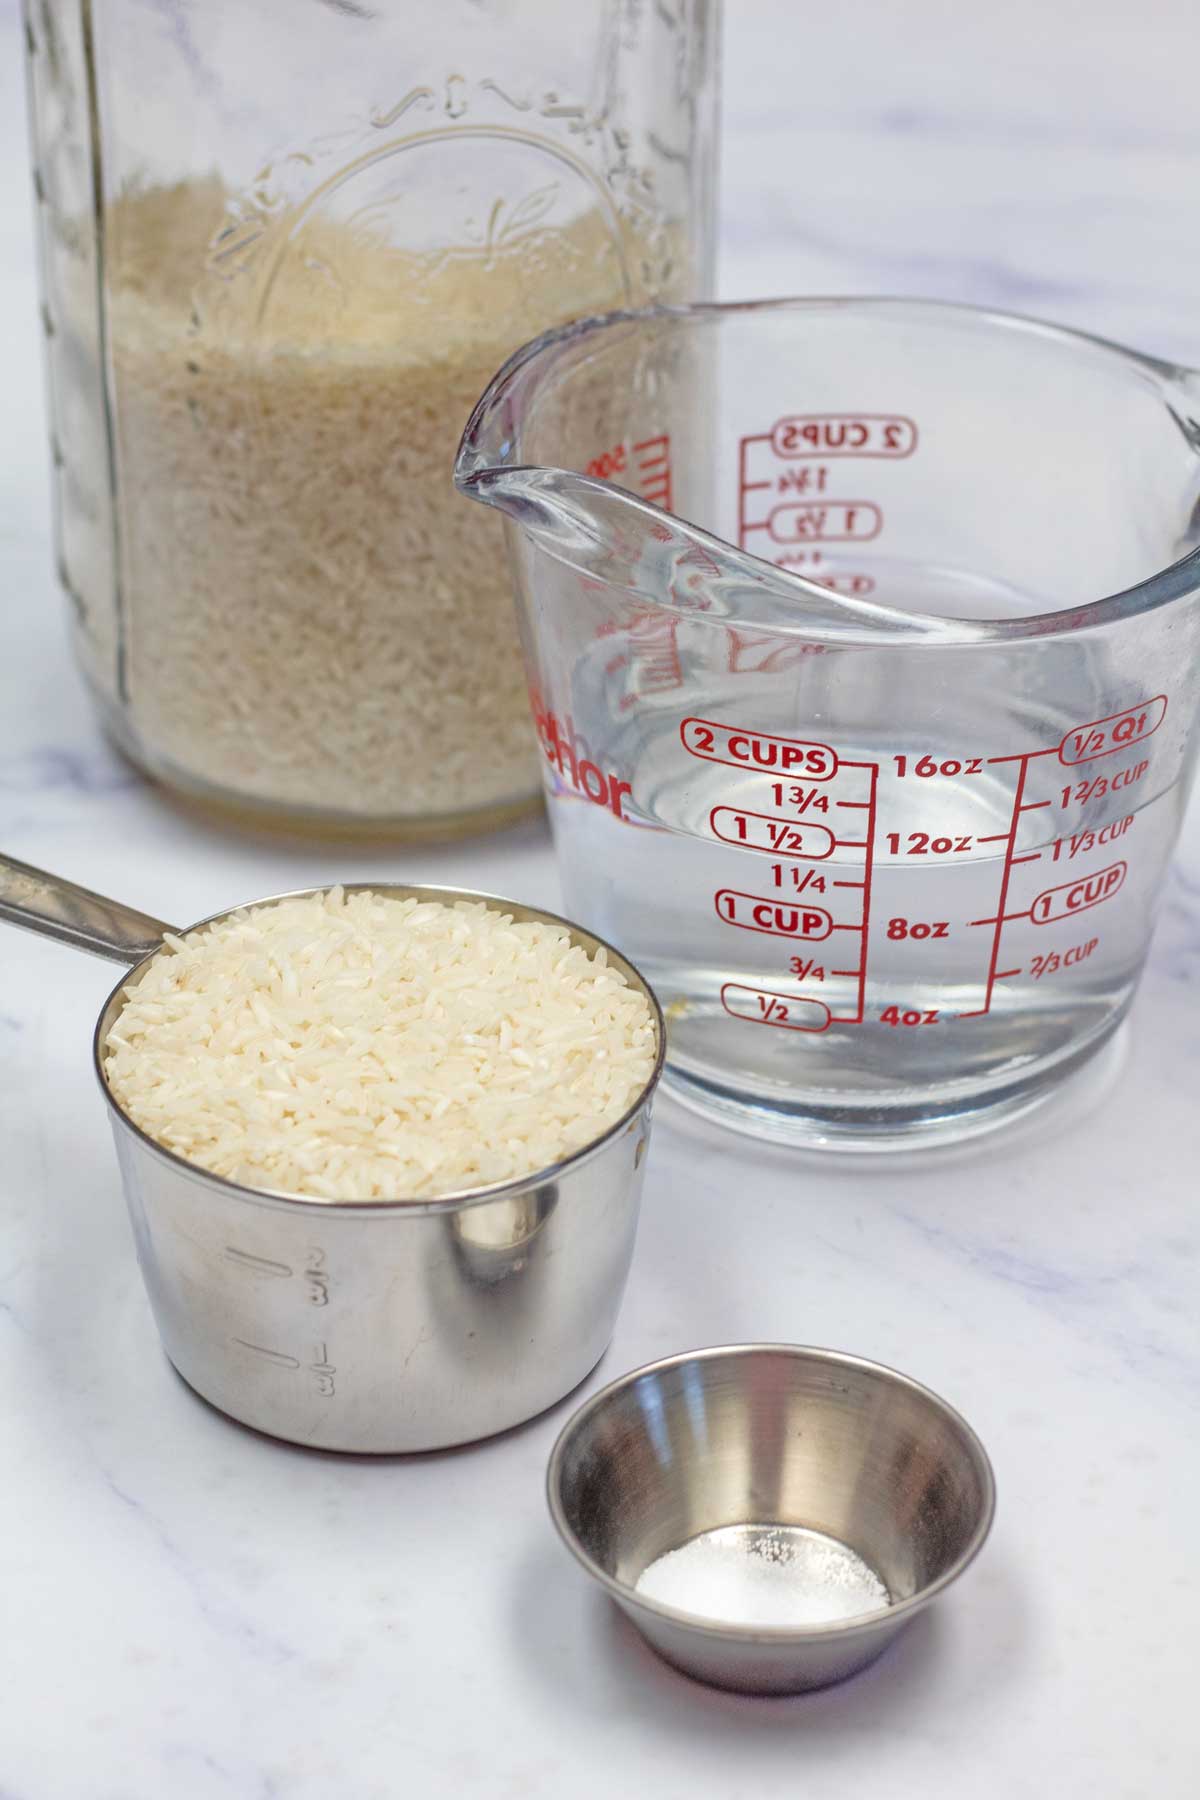 Tall image showing ingredients needed to make instant pot long grain white rice.